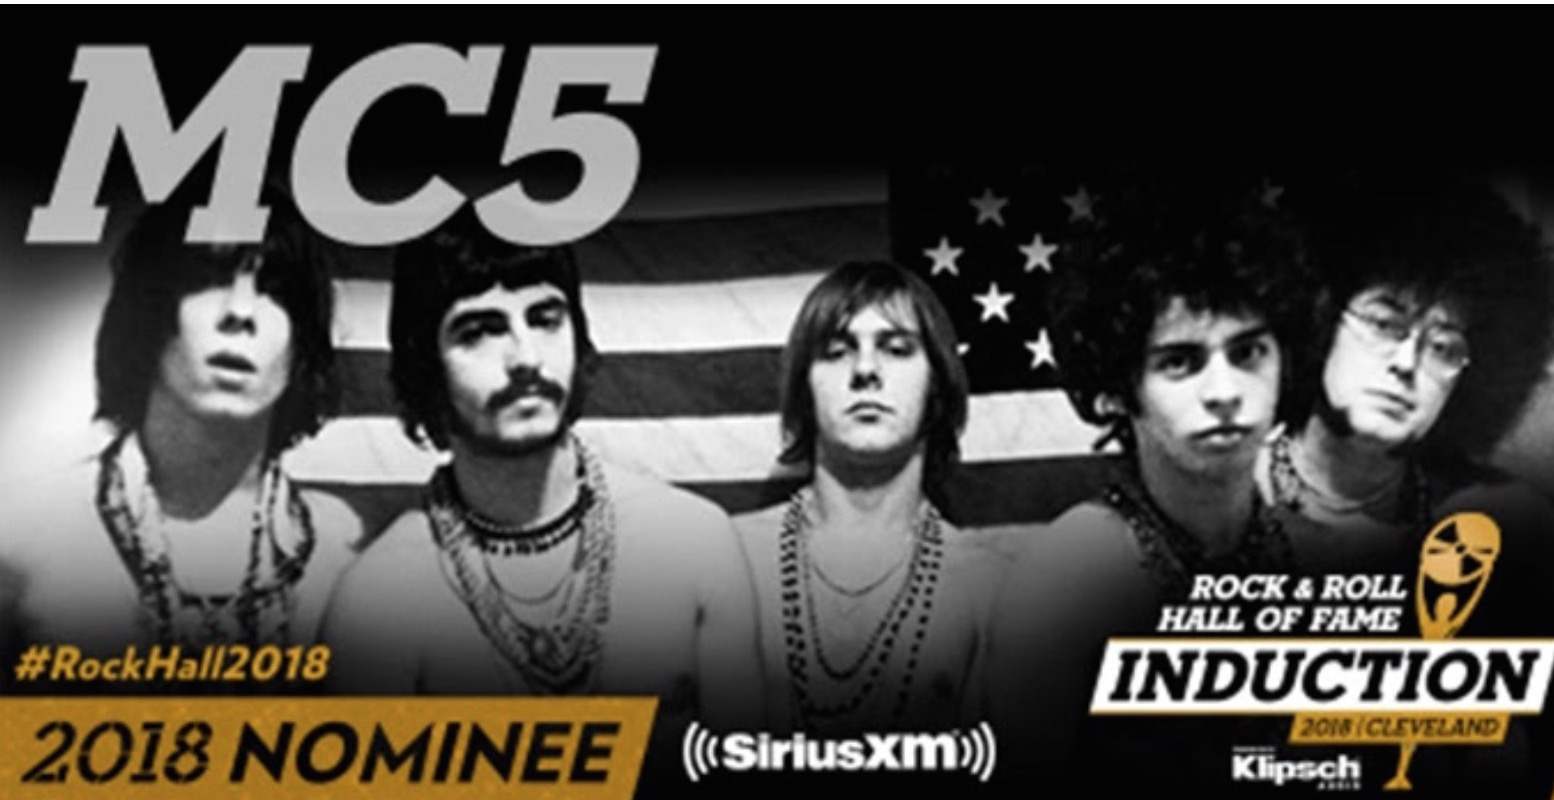 Vote for The MC5 to be in the Rock and Roll Hall of Fame